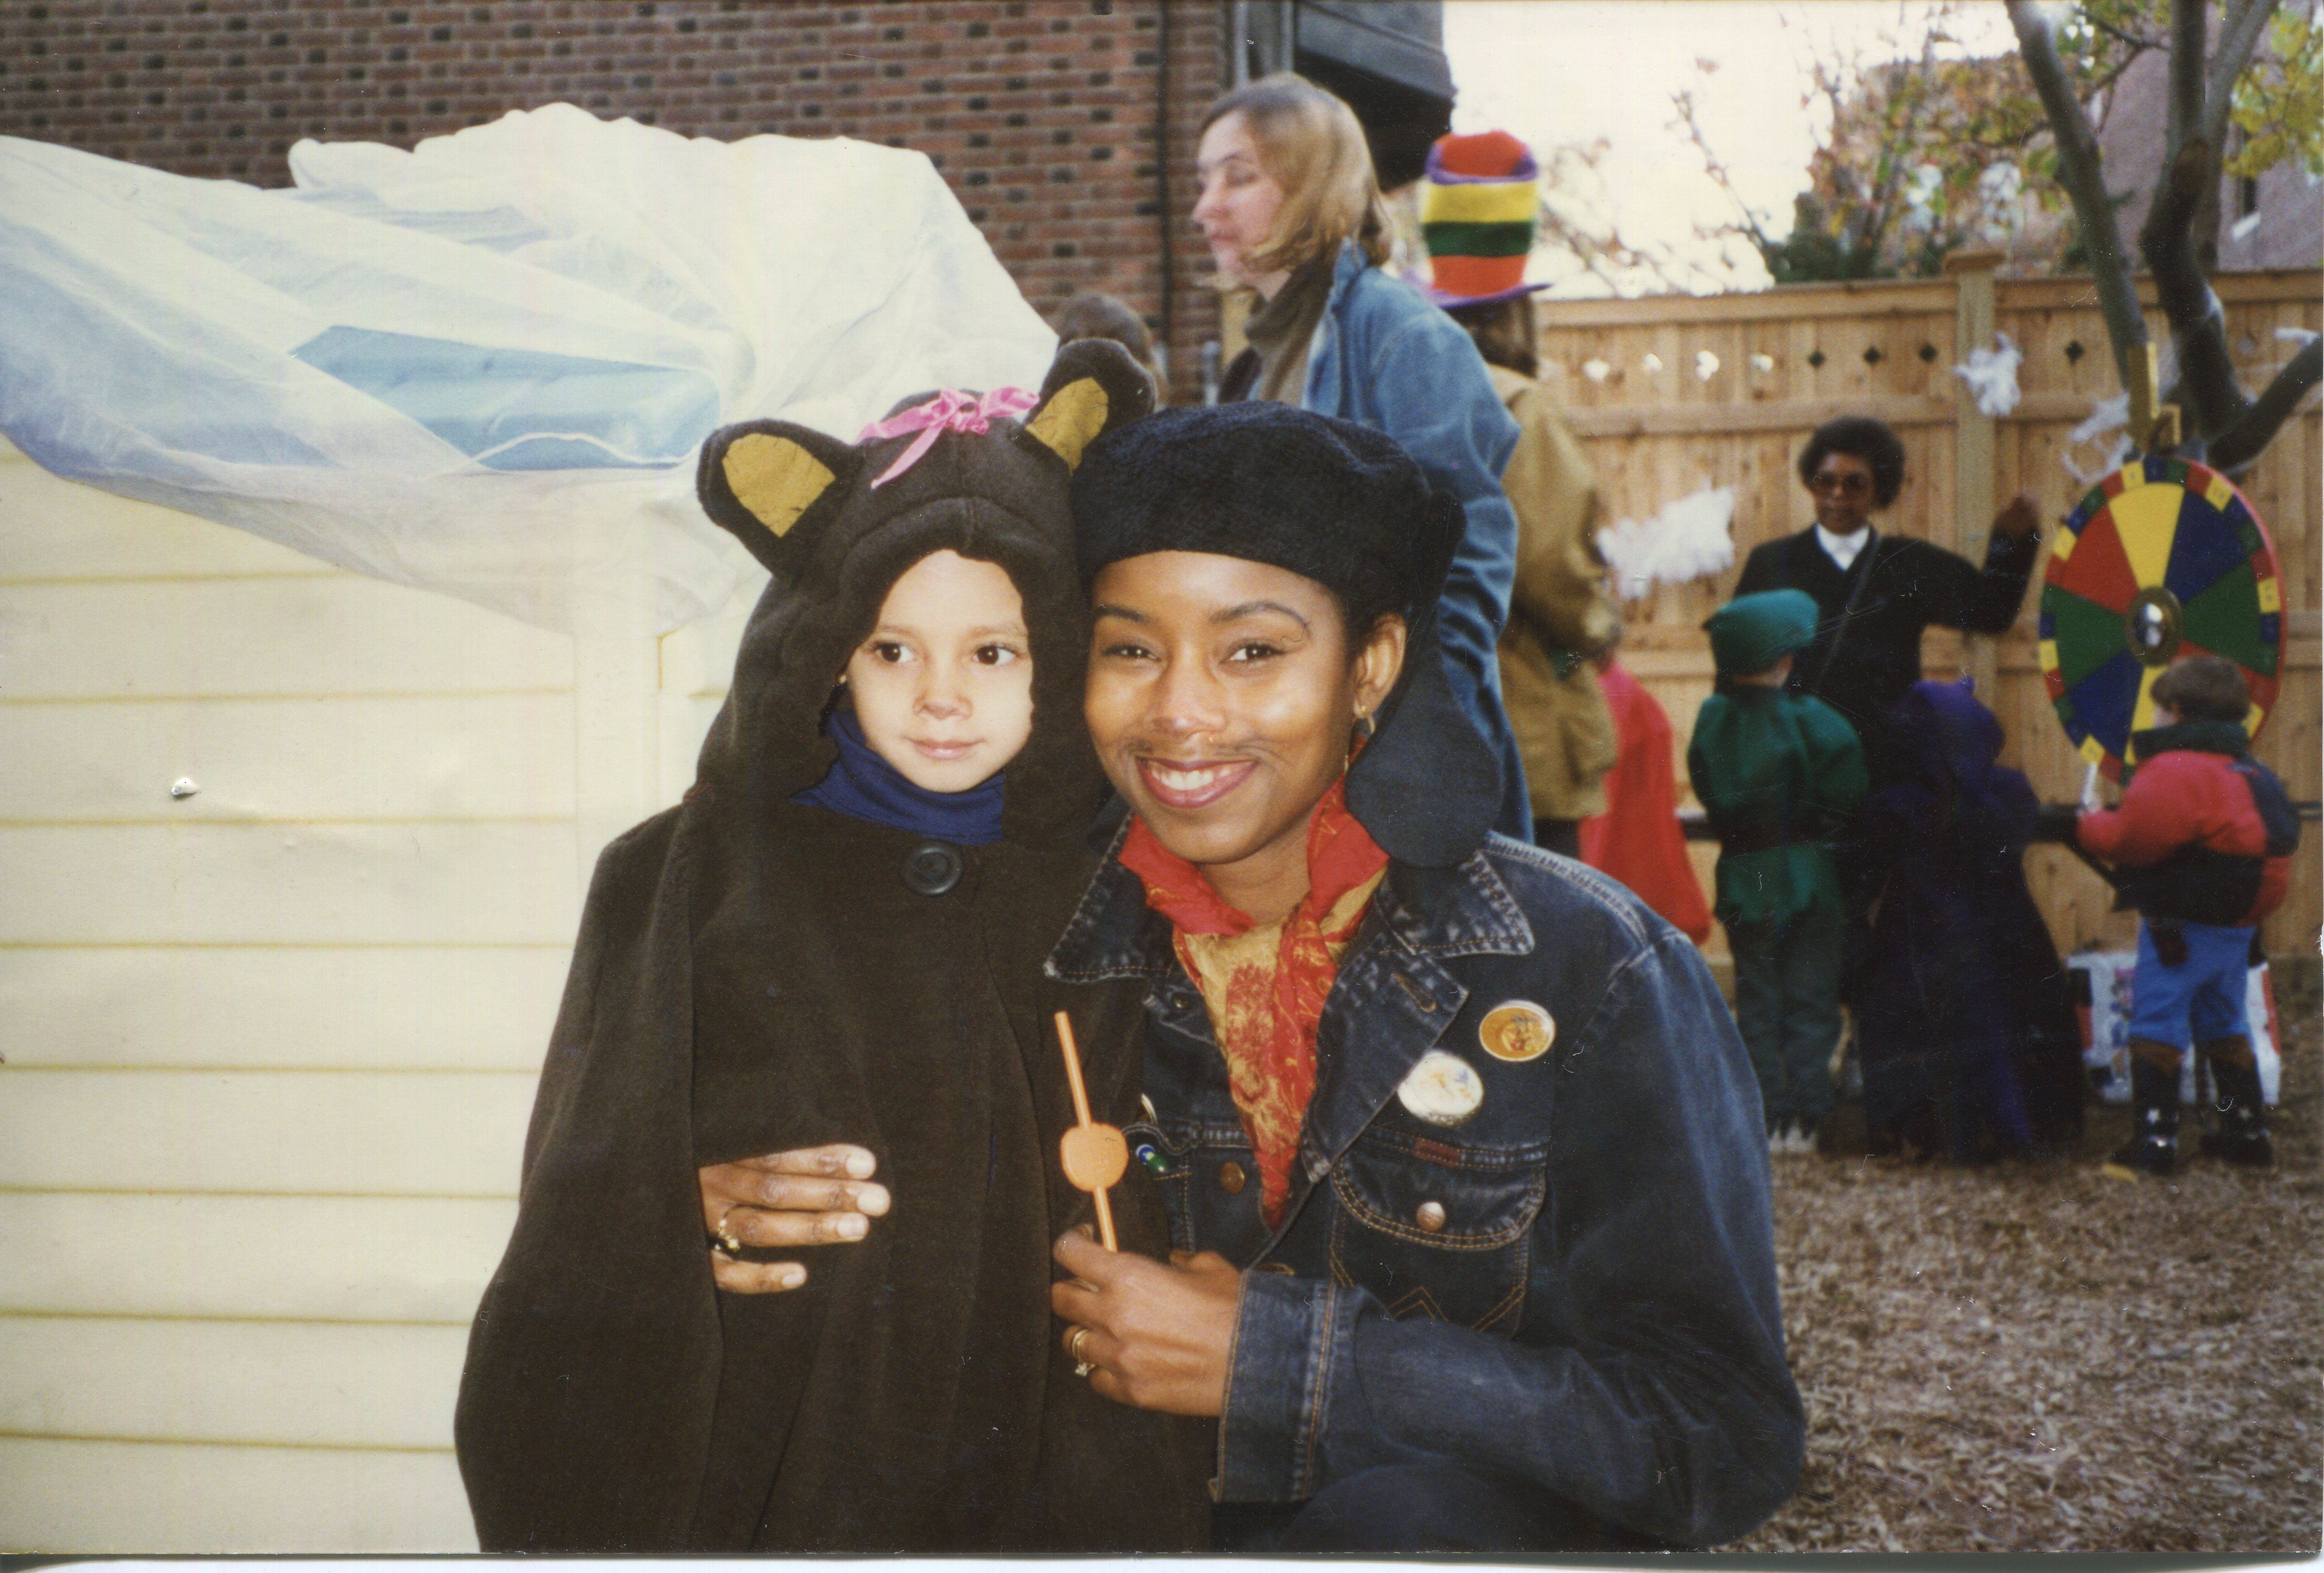  My mom and I at the Poly Prep Halloween party. My mom sewed the bear costume for me herself. Mid 90s.